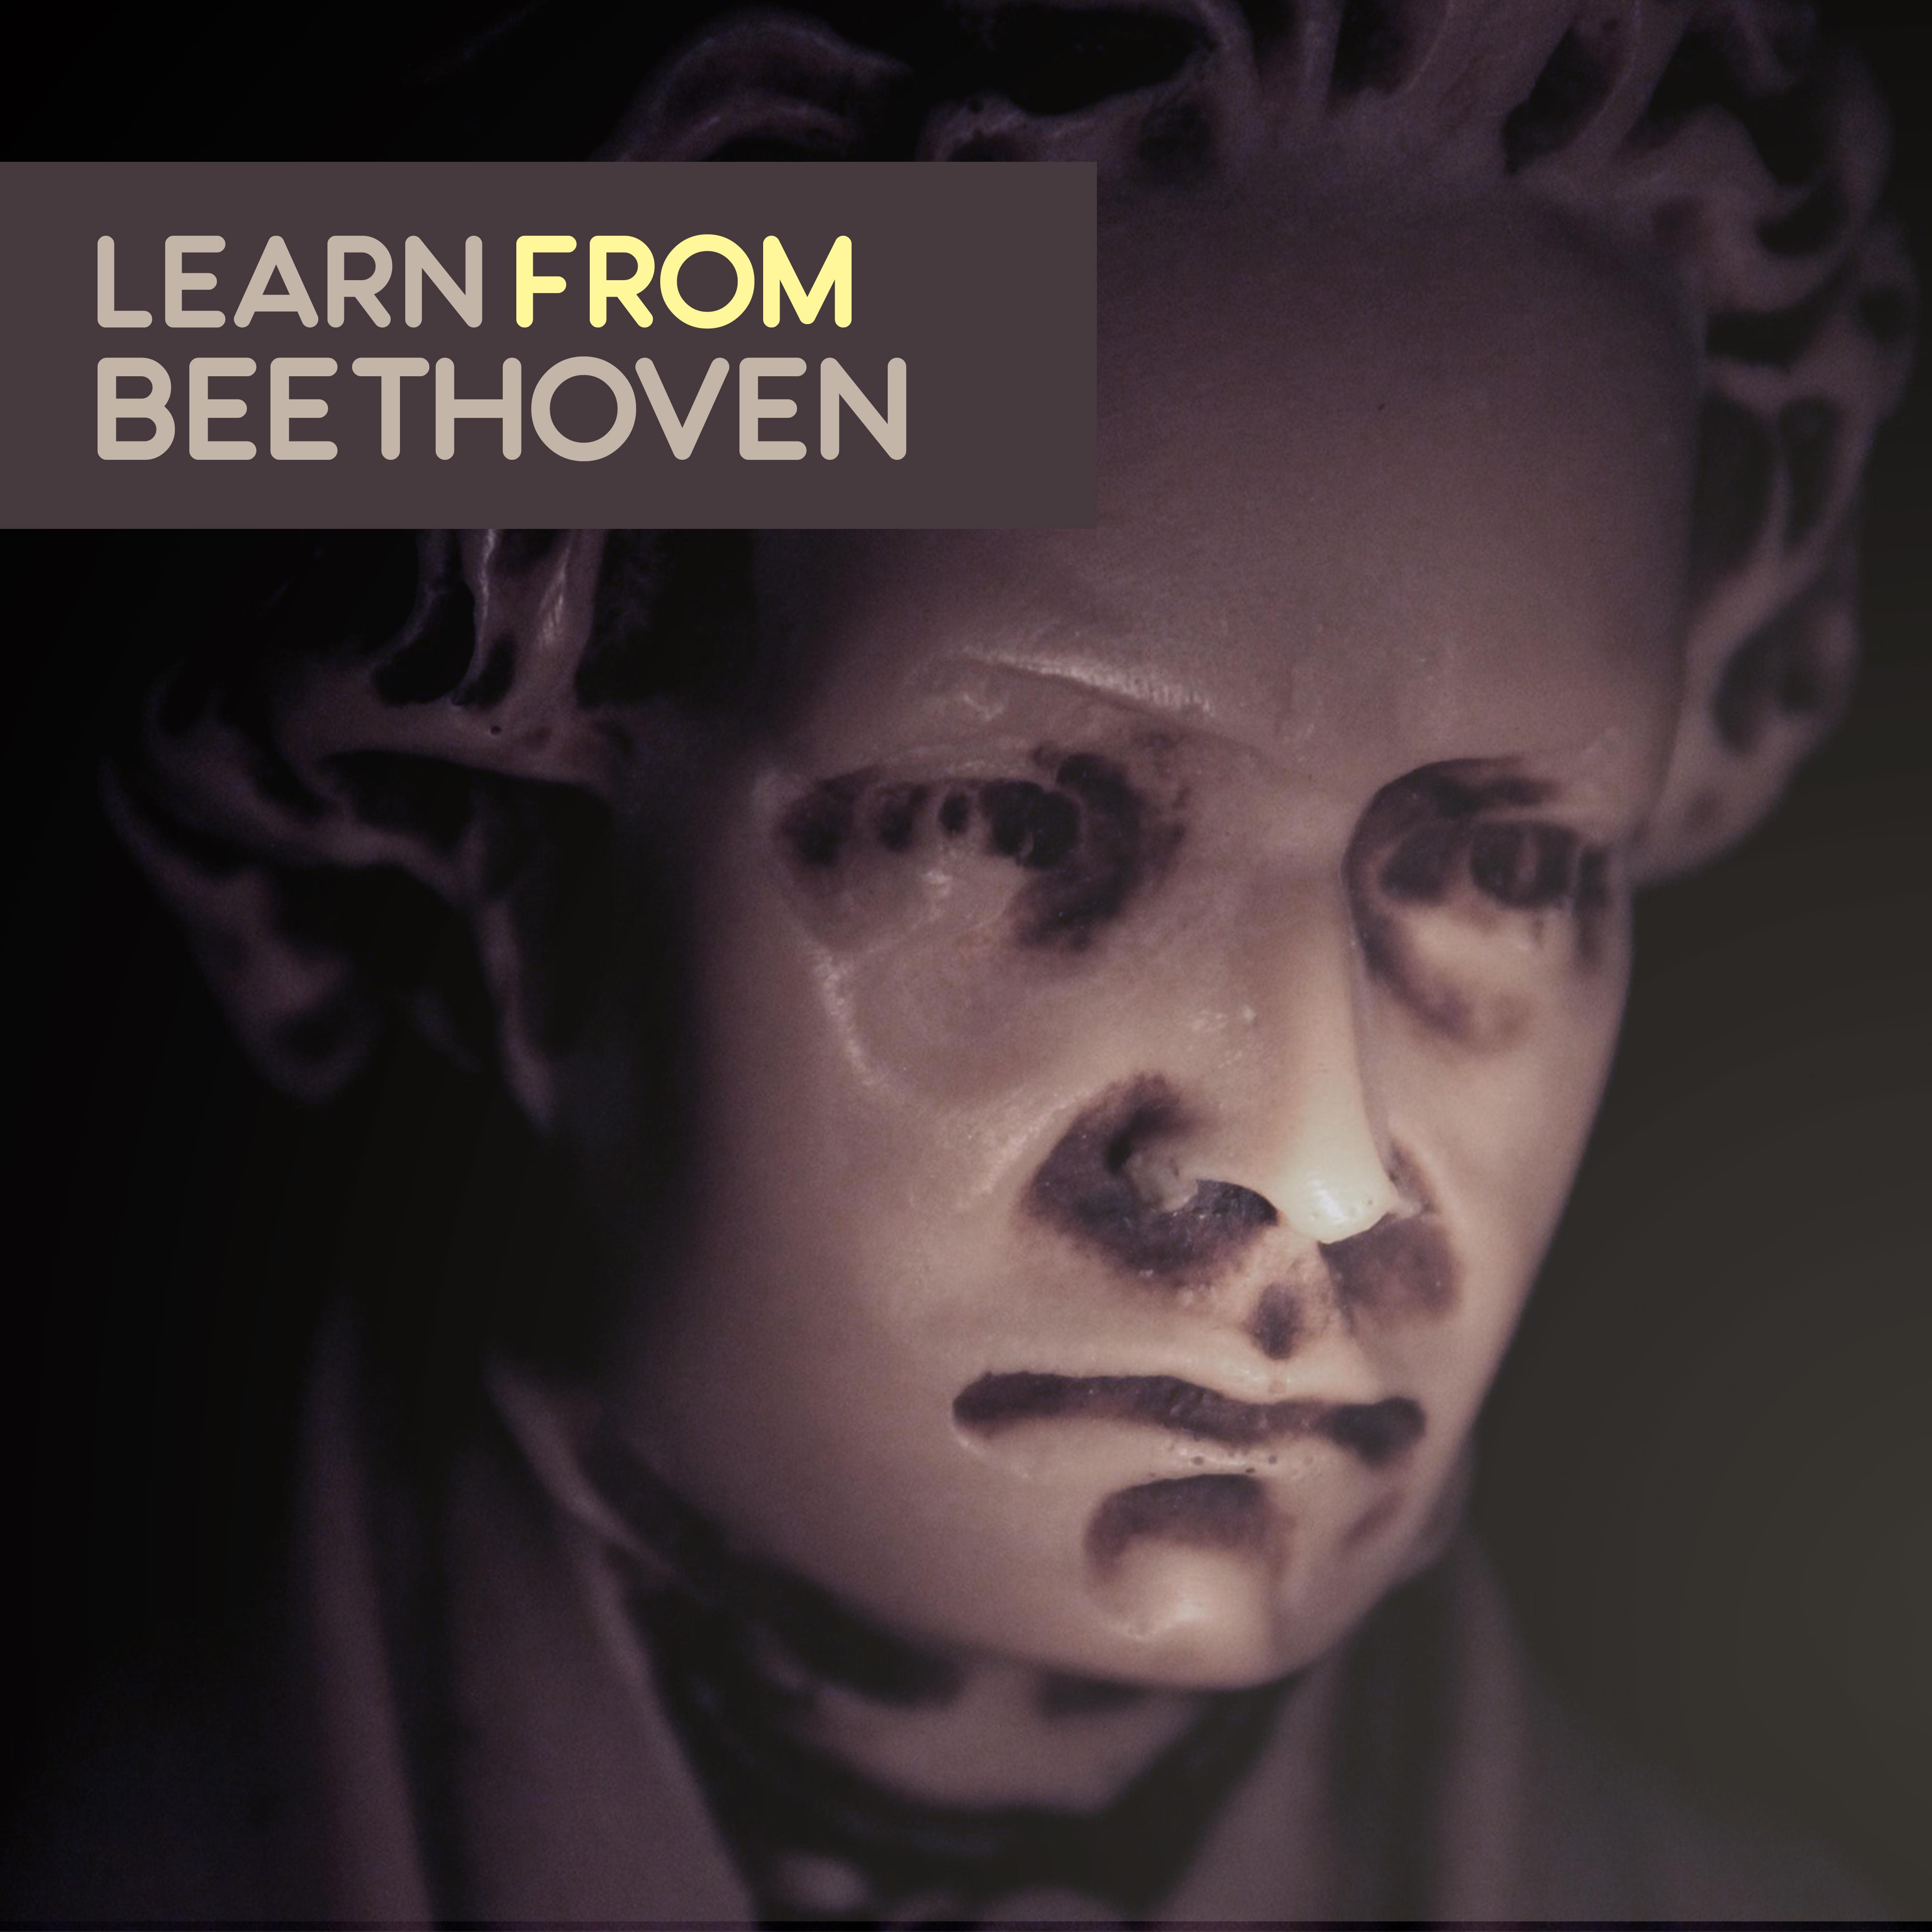 Learn from Beethoven – Studying Music, Focus, Stress Relief, Music Helps Pass Exam, Easy Work